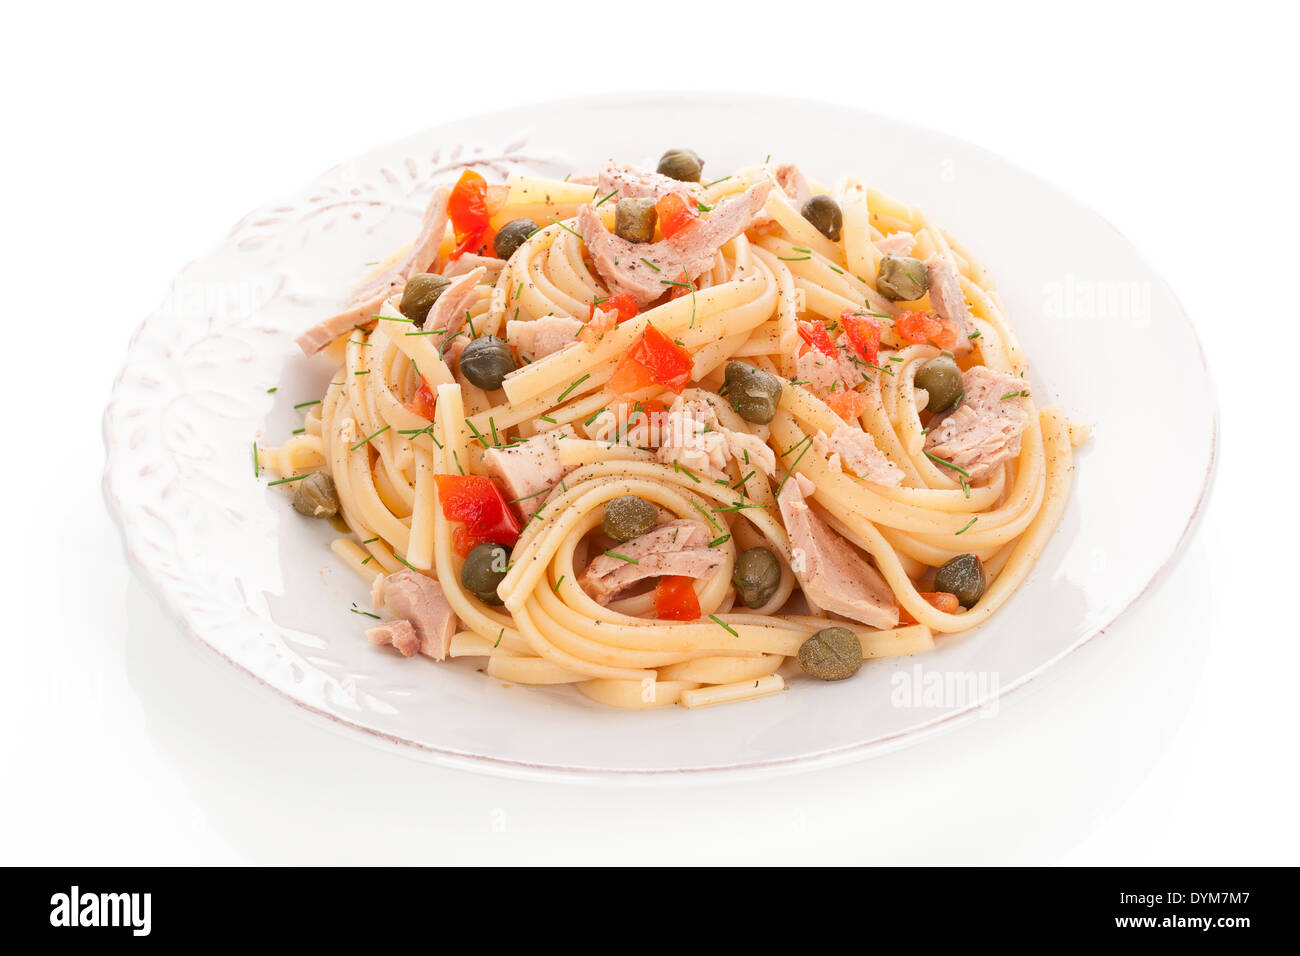 Culinary pasta with capers, tuna and vegetable on vintage plate isolated on white background. Luxurious culinary italian eating. Stock Photo